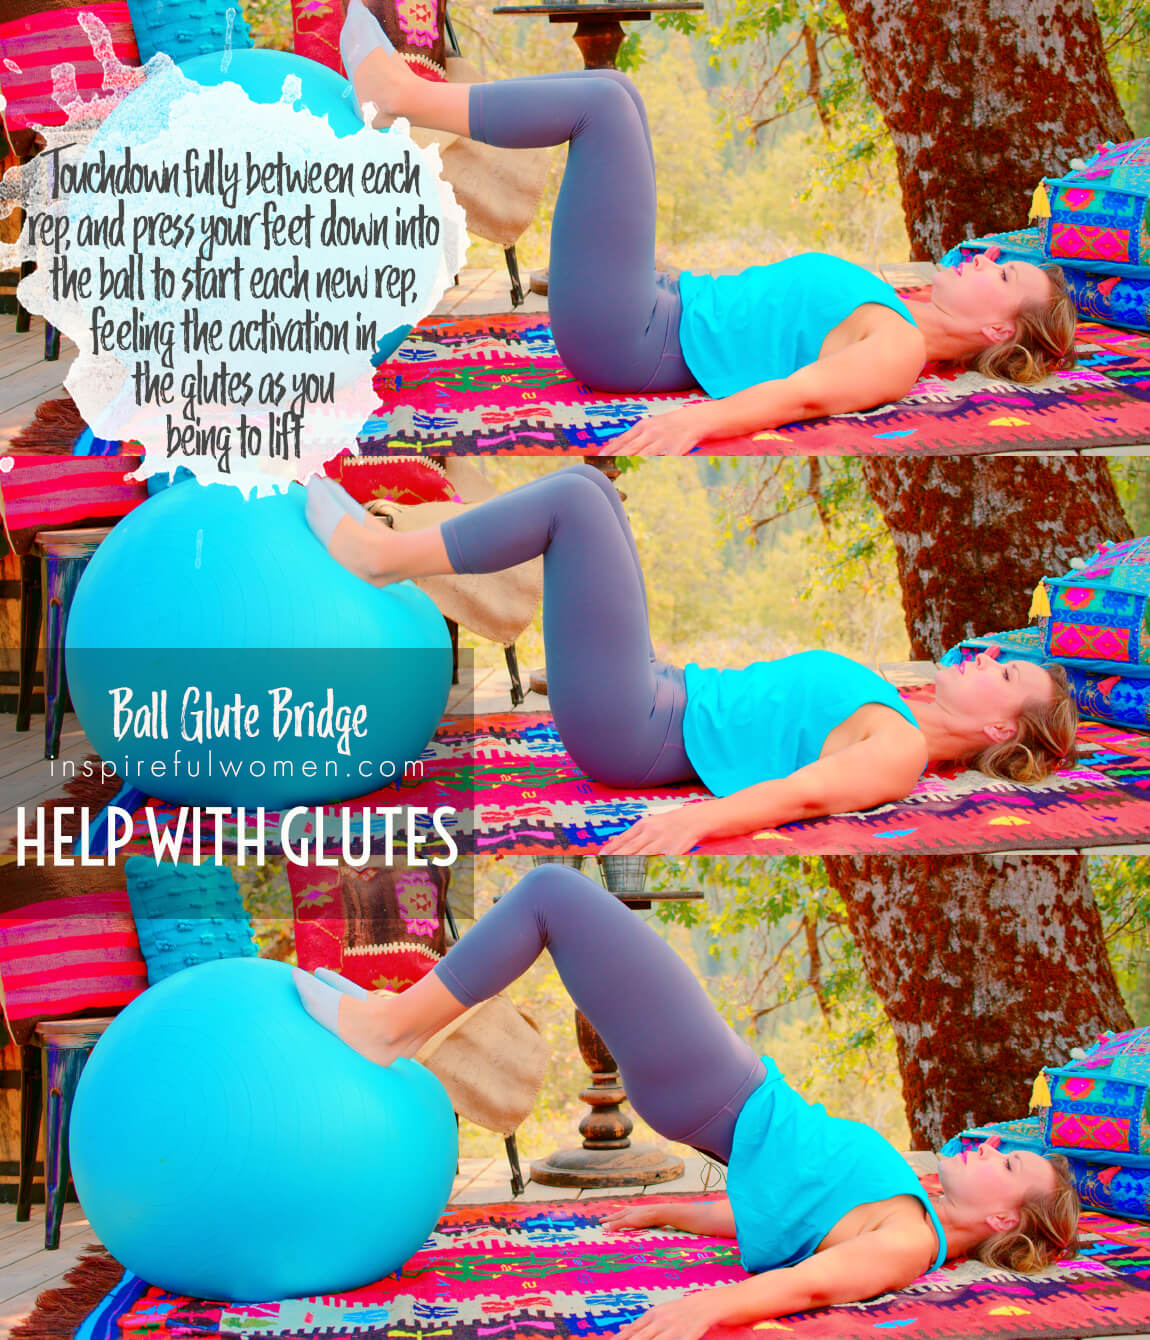 help-with-glutes-stability-ball-glute-bridge-hamstring-gluteus-maximus-home-exercise-proper-form